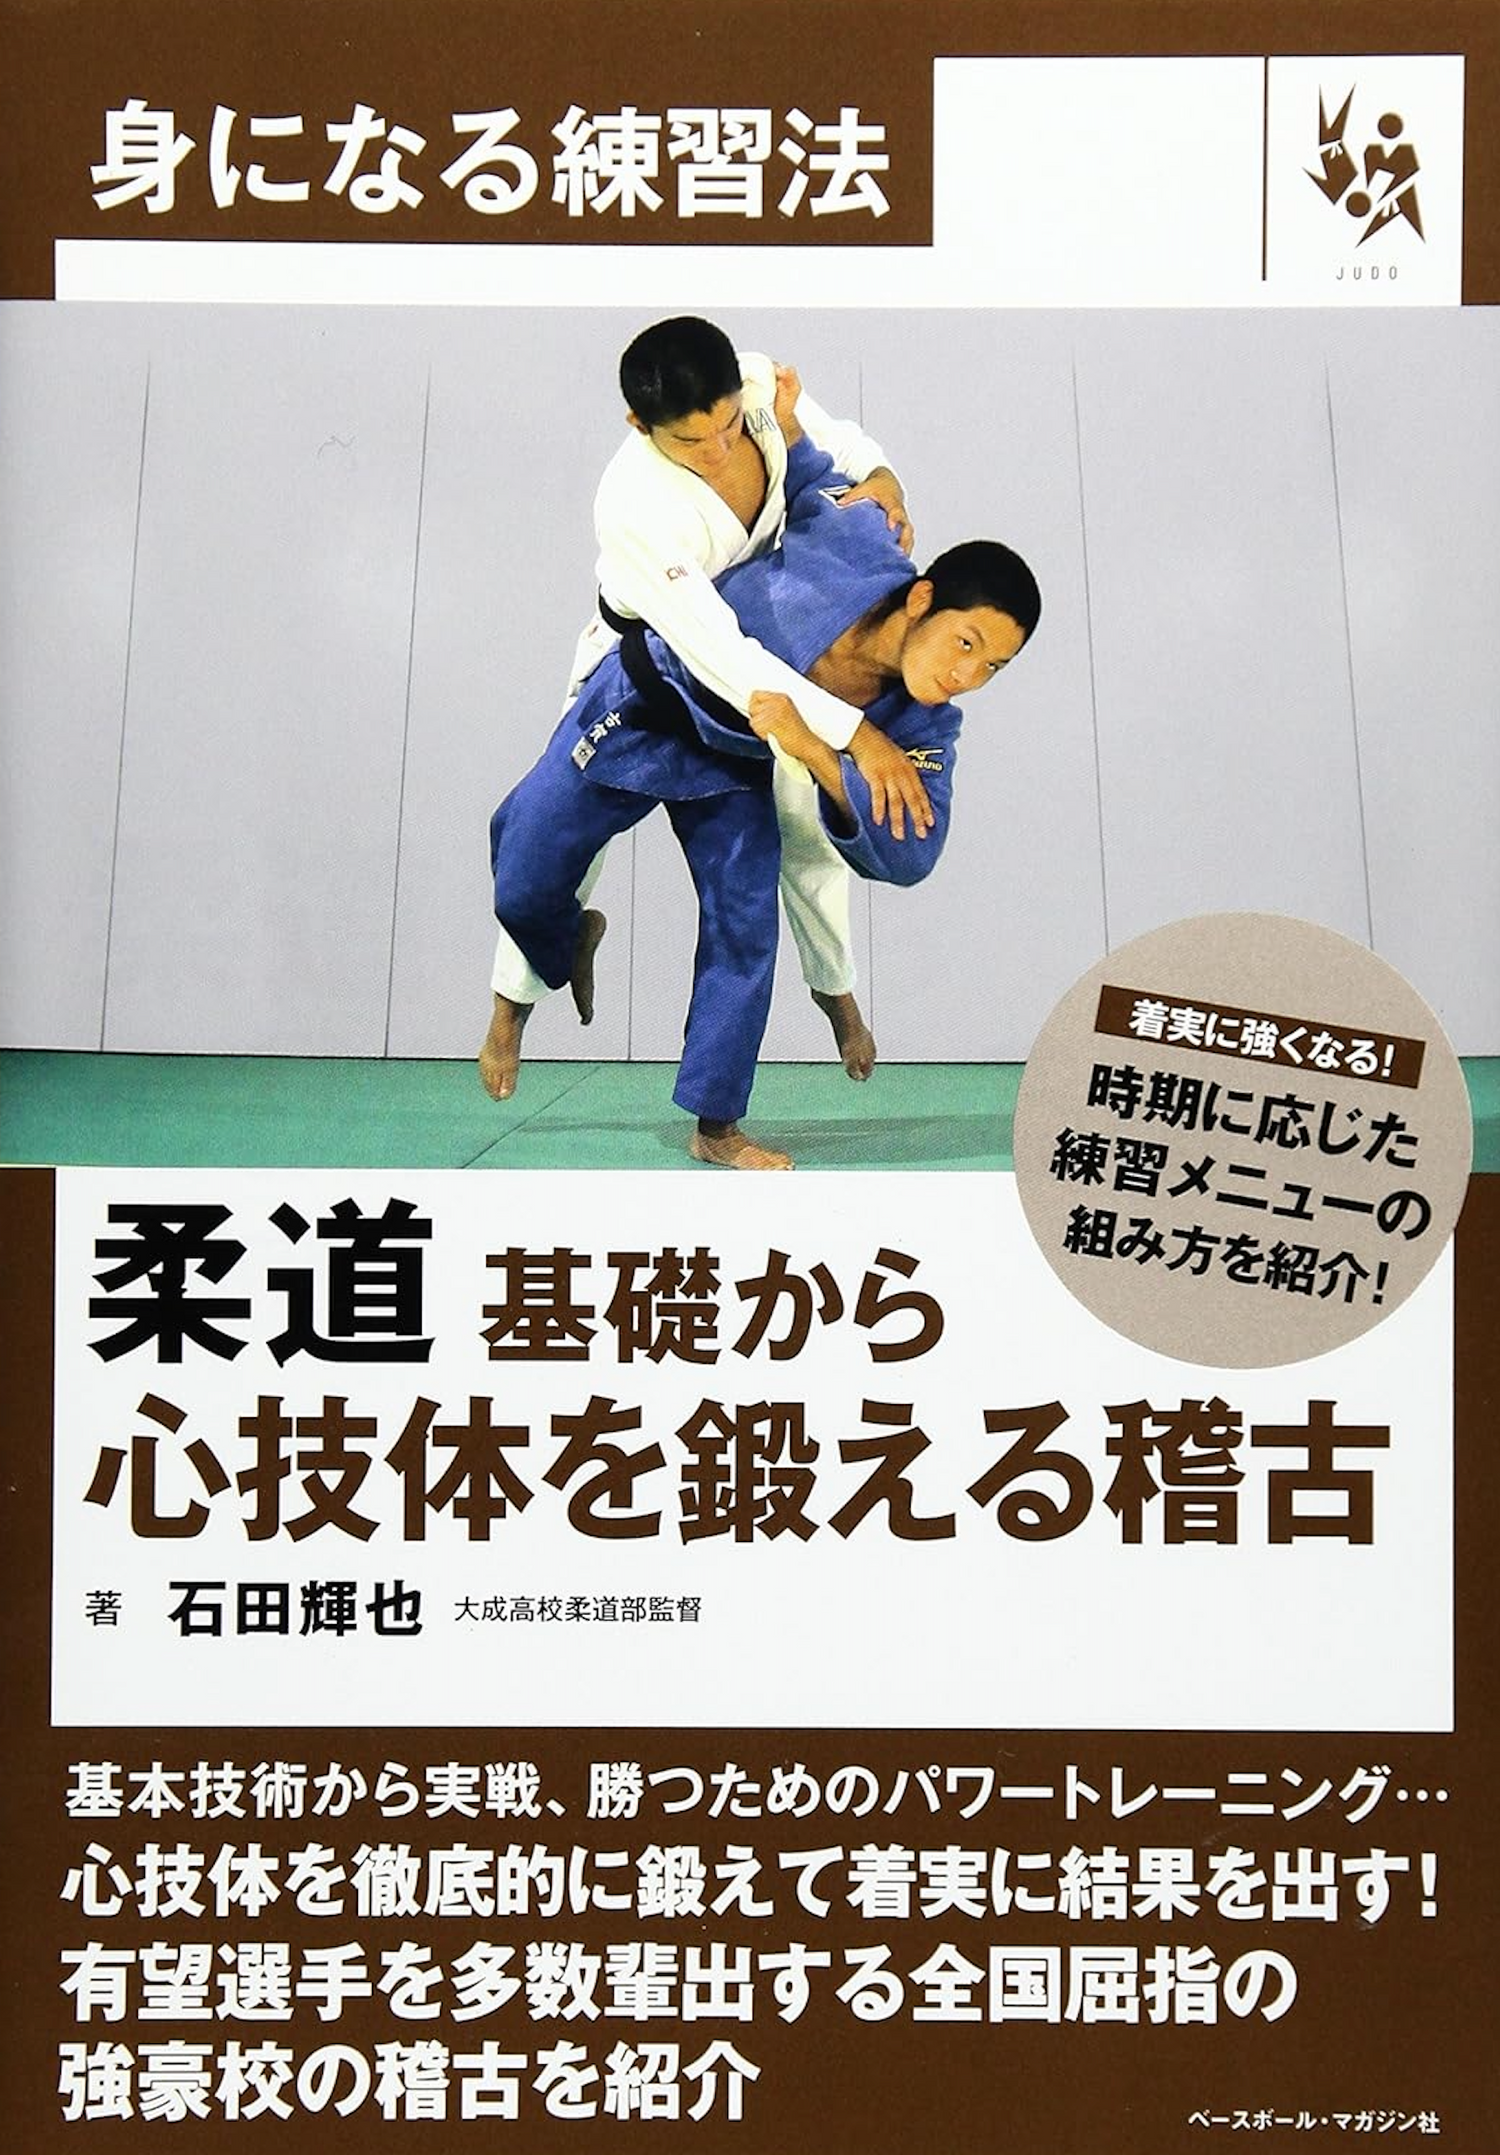 Judo: Practice to Train Your Mind, Technique, & Body From the Basics Book by Teruya Ishida